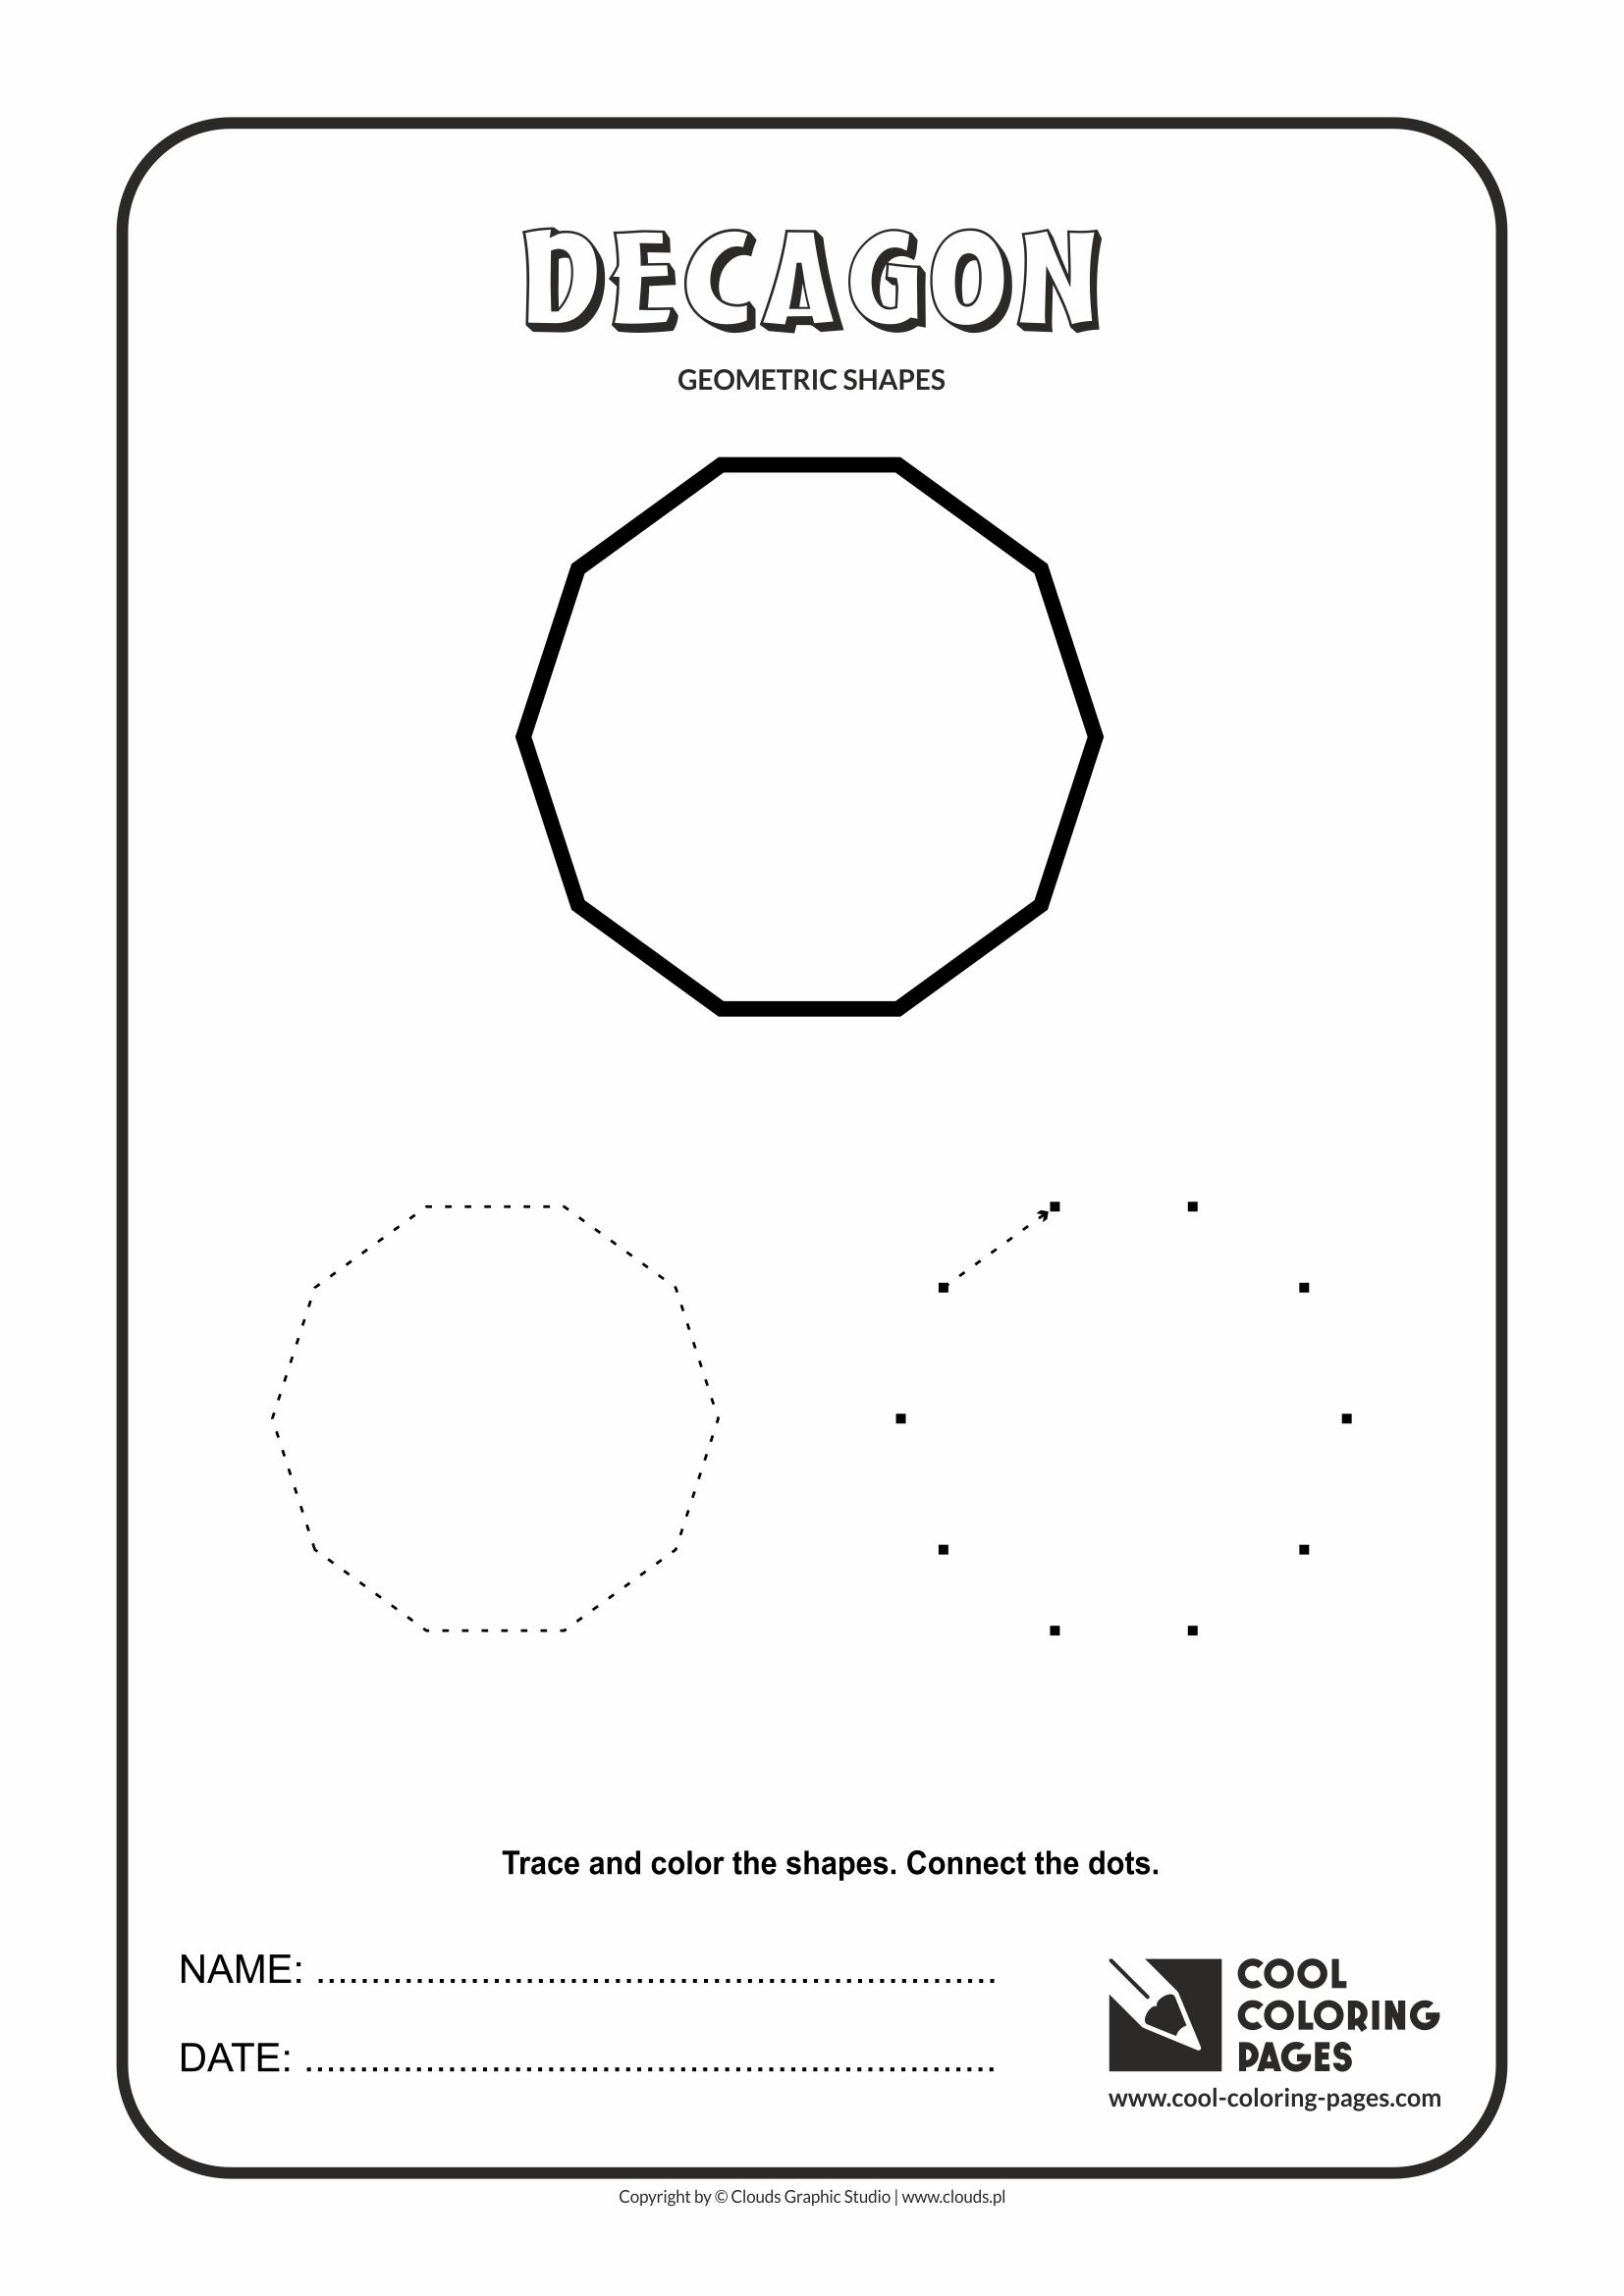 Cool Coloring Pages - Geometric shapes / Decagon